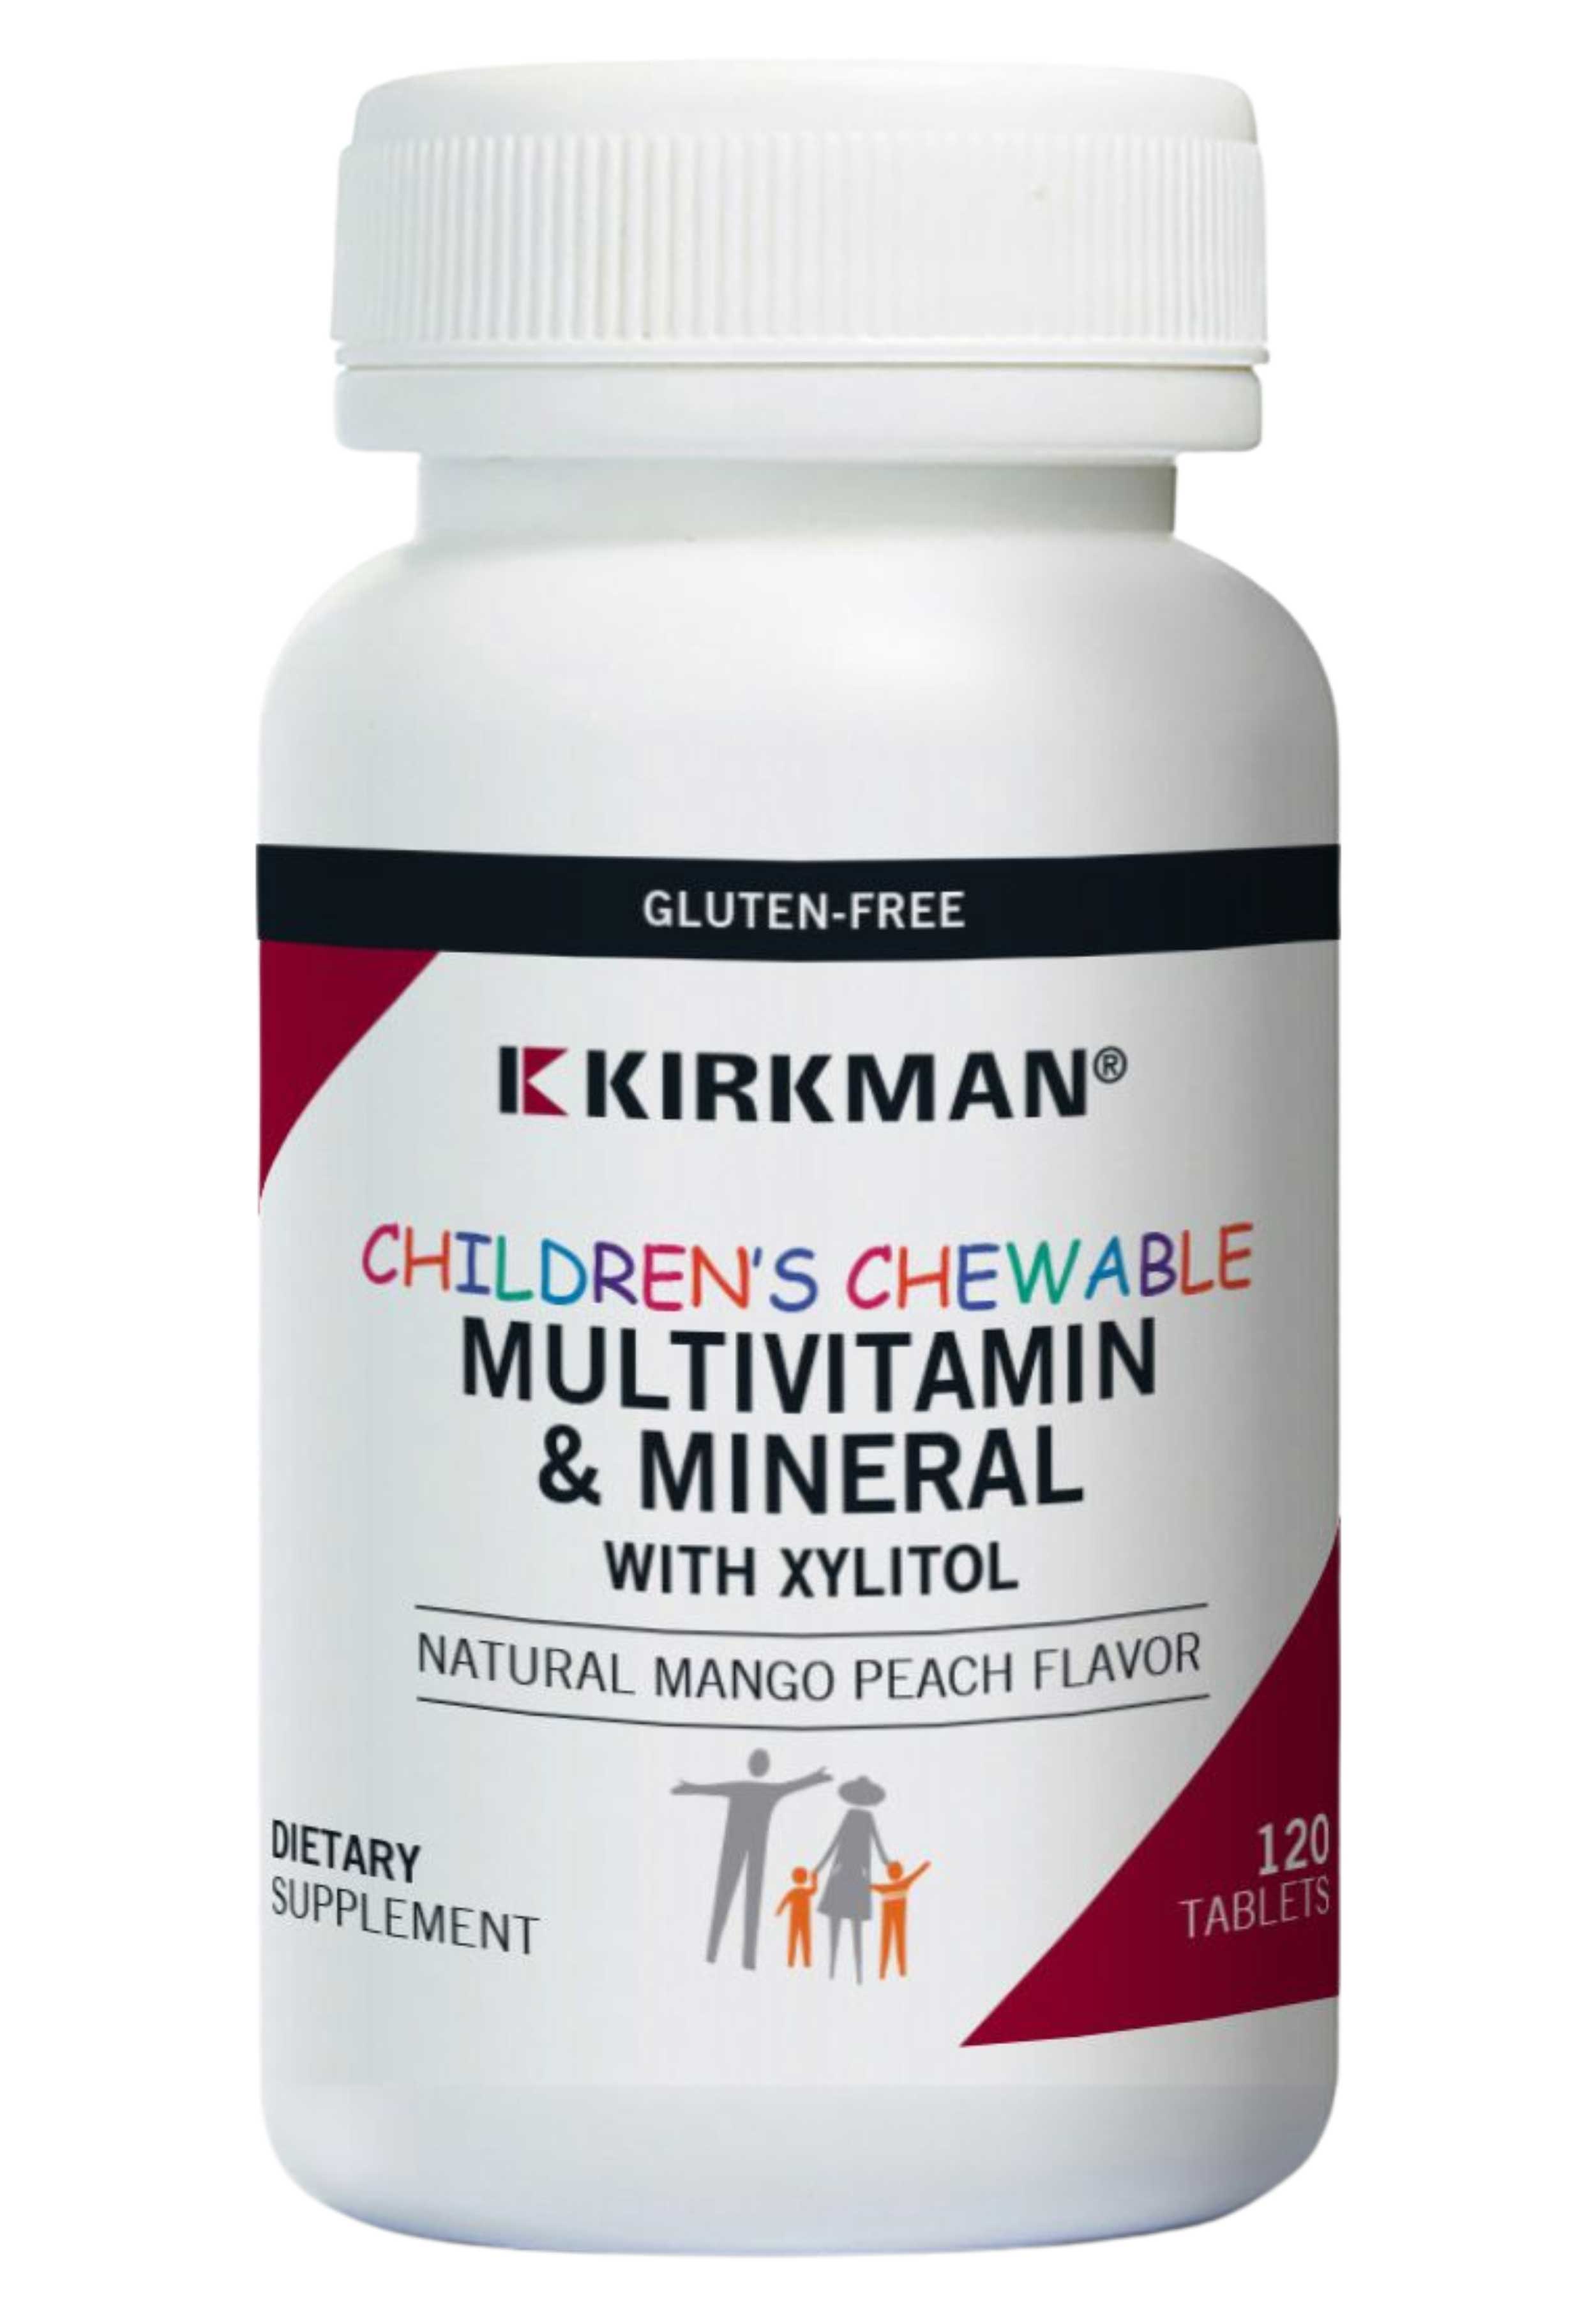 Kirkman Children's Chewable Multivitamin & Mineral with Xylitol